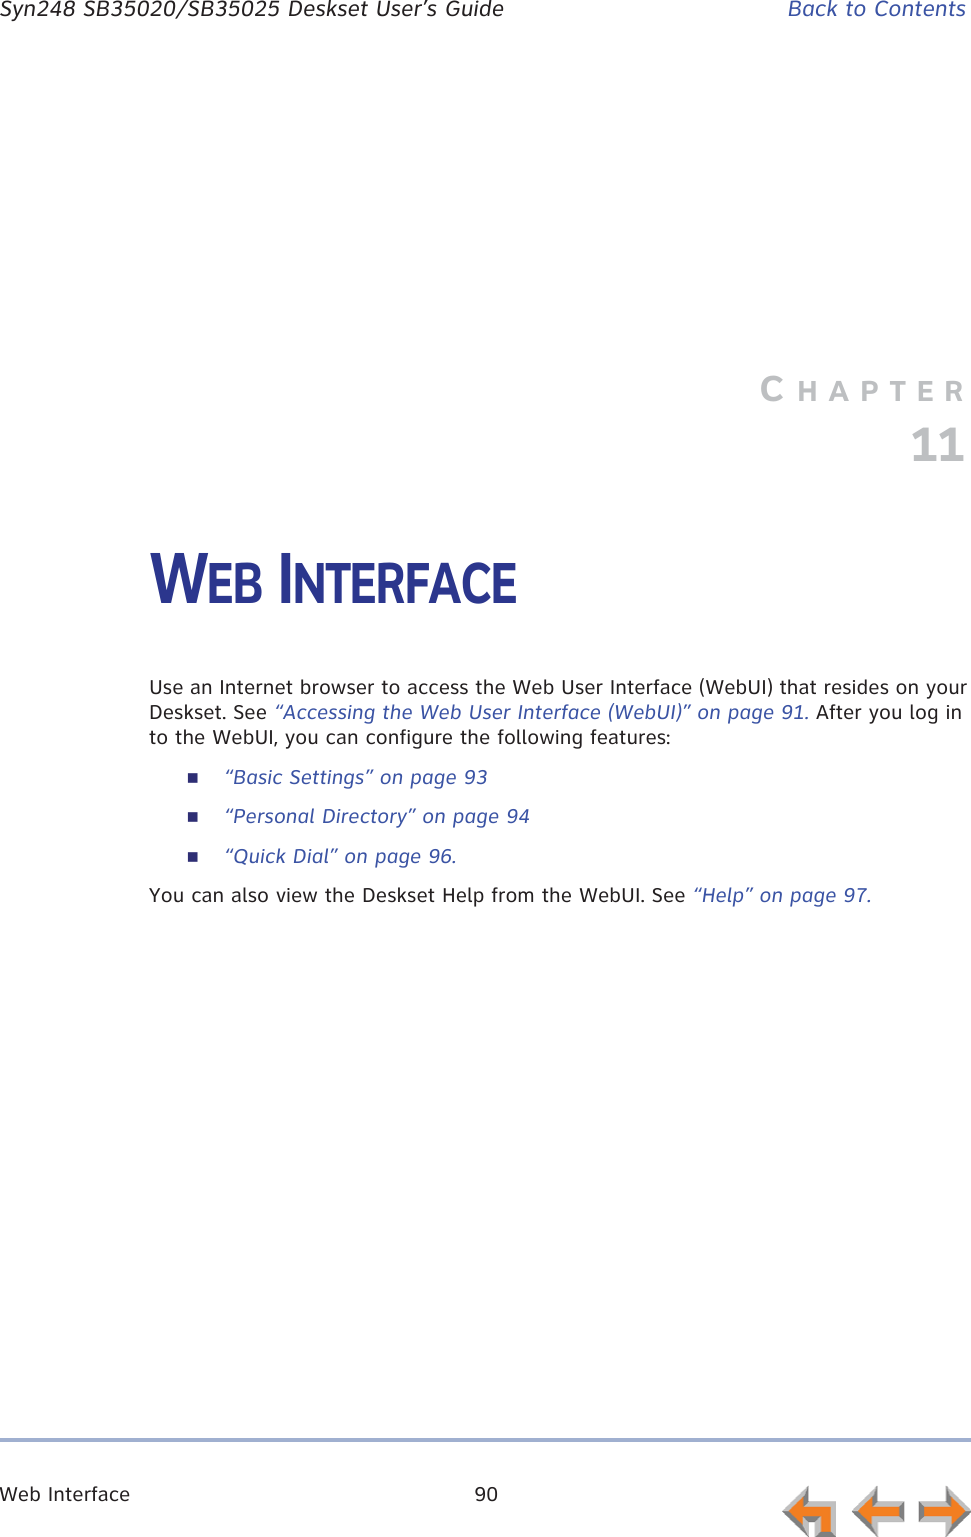 Web Interface 90      Syn248 SB35020/SB35025 Deskset User’s Guide Back to ContentsCHAPTER11WEB INTERFACEUse an Internet browser to access the Web User Interface (WebUI) that resides on your Deskset. See “Accessing the Web User Interface (WebUI)” on page 91. After you log in to the WebUI, you can configure the following features:“Basic Settings” on page 93“Personal Directory” on page 94“Quick Dial” on page 96.You can also view the Deskset Help from the WebUI. See “Help” on page 97.